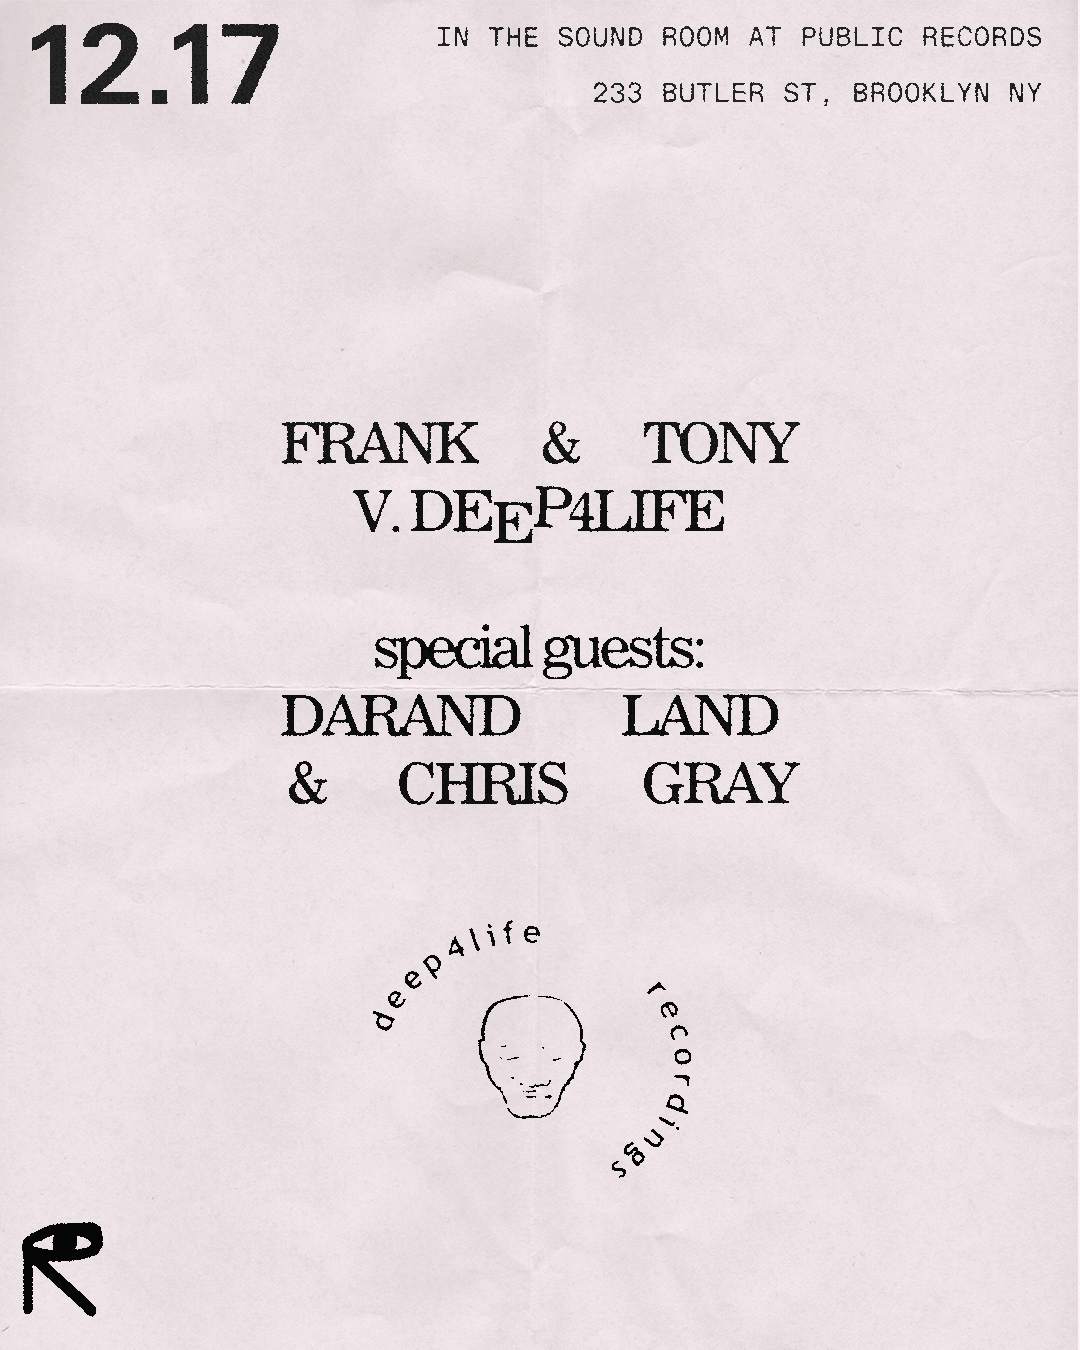 Frank & Tony v. Deep4life with special guests Darand Land & Chris Gray - フライヤー表